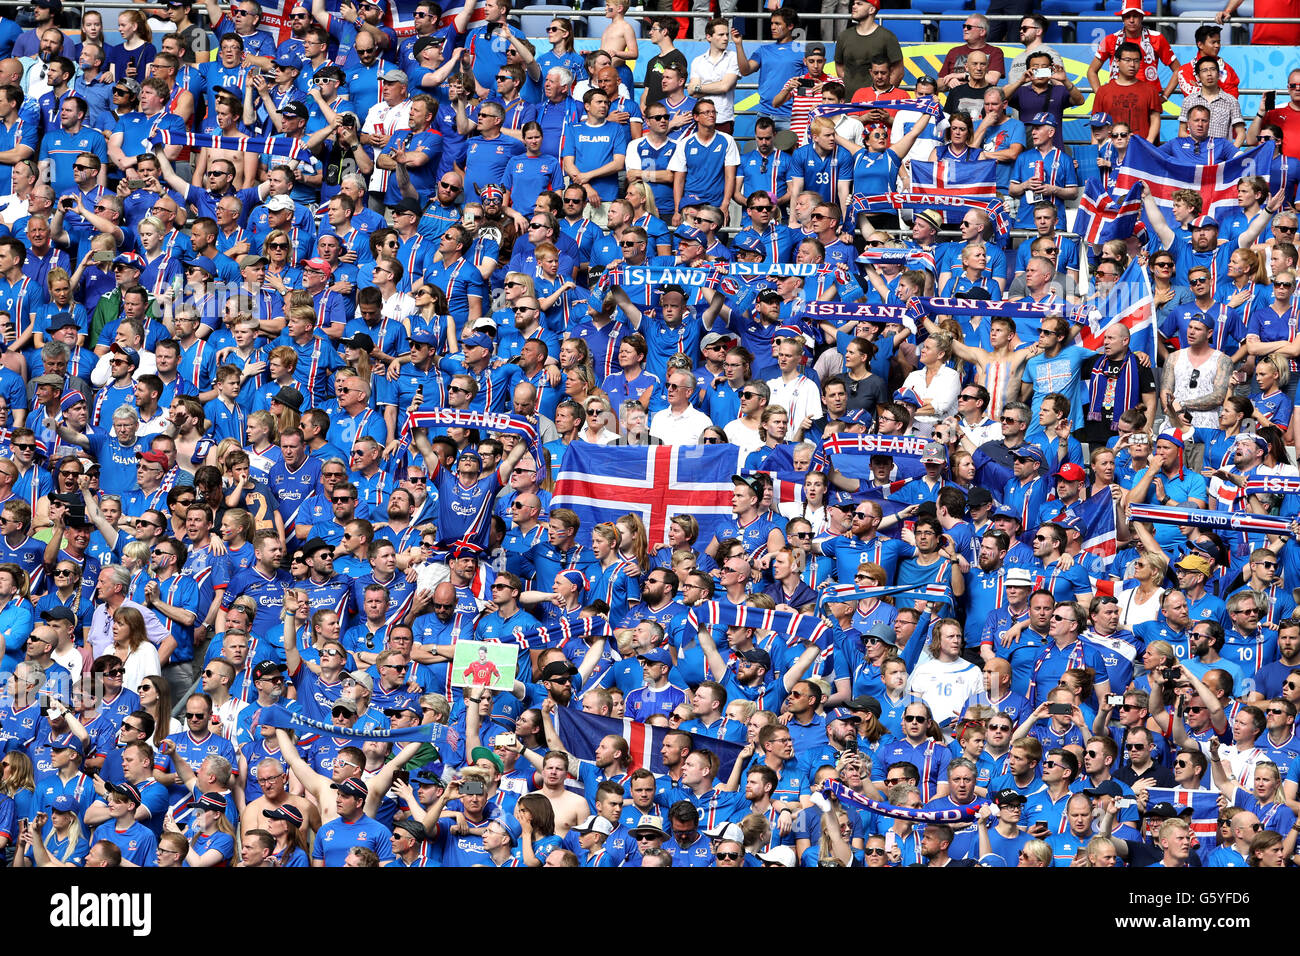 Iceland fans cheer on their side in the stands during the Euro 2016, Group F match at the Stade de France, Paris. Stock Photo